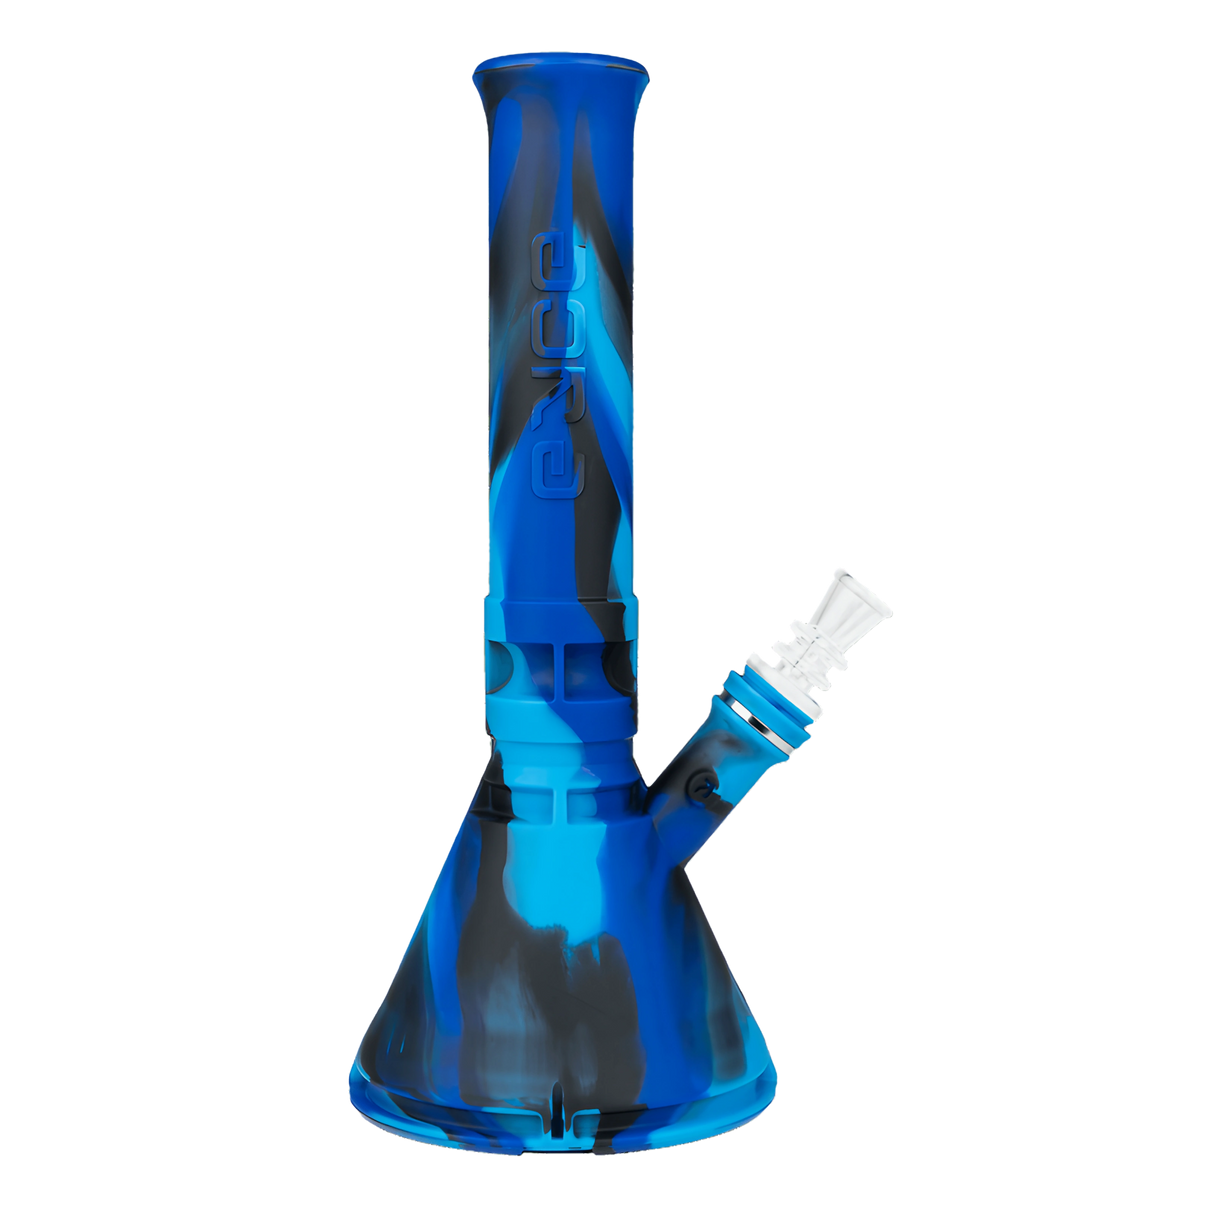 Eyce Beaker Silicone Bong in Blue - Durable, Easy to Clean, Front View